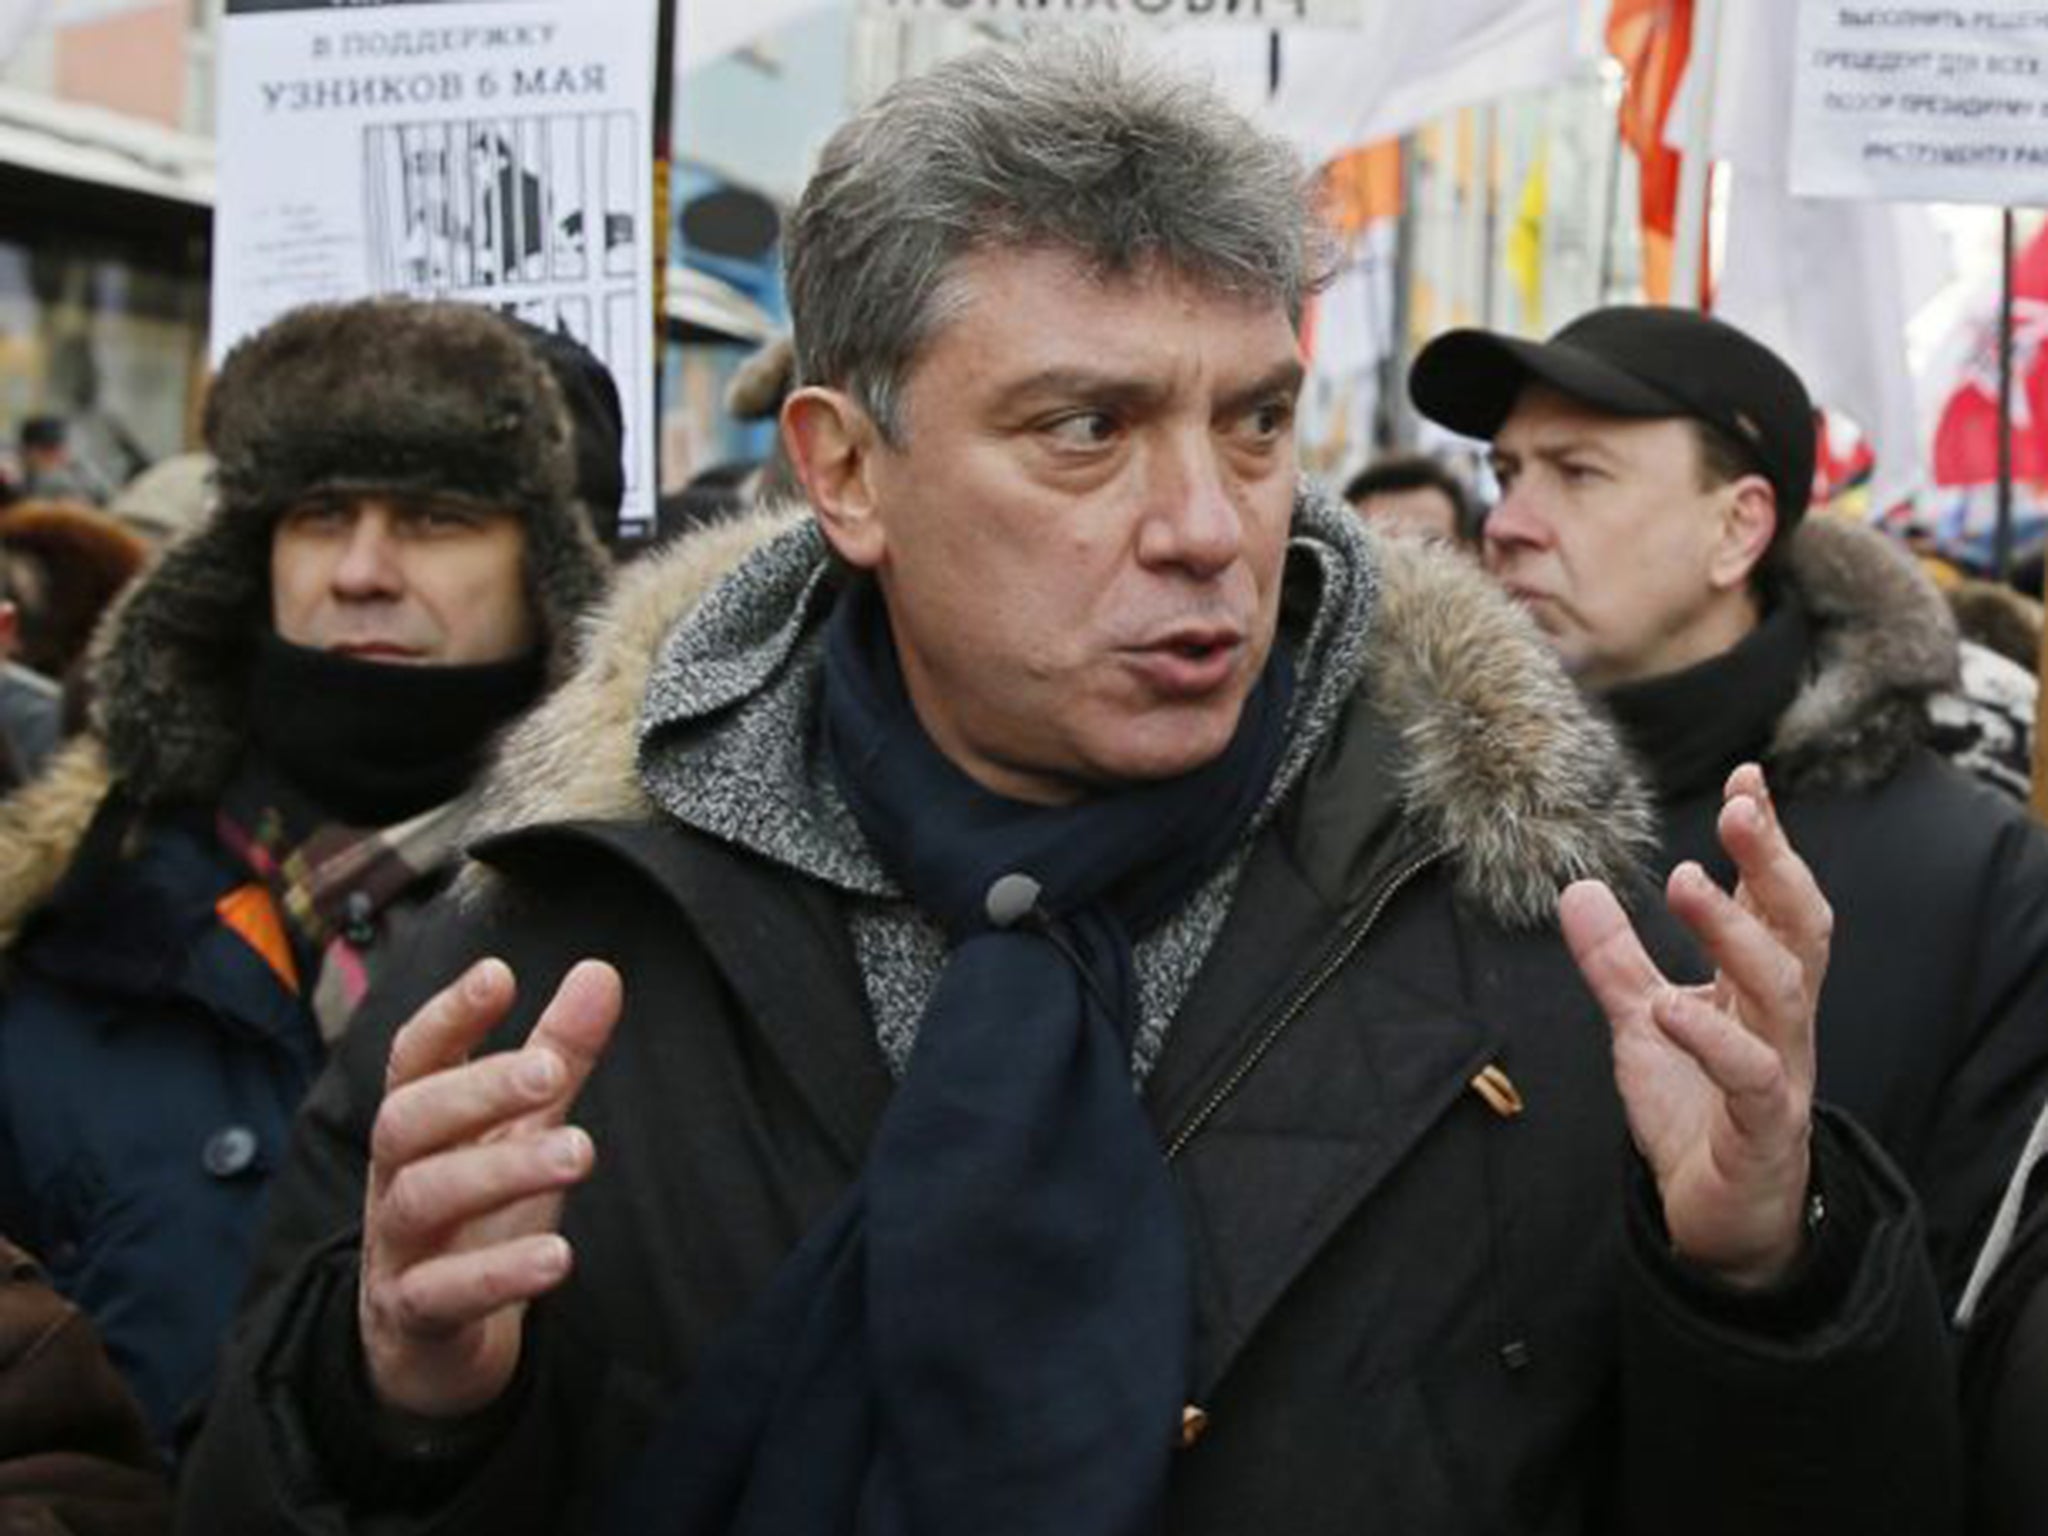 Putin critic: Nemtsov took a leading role in the opposition to the Kremlin’s policies